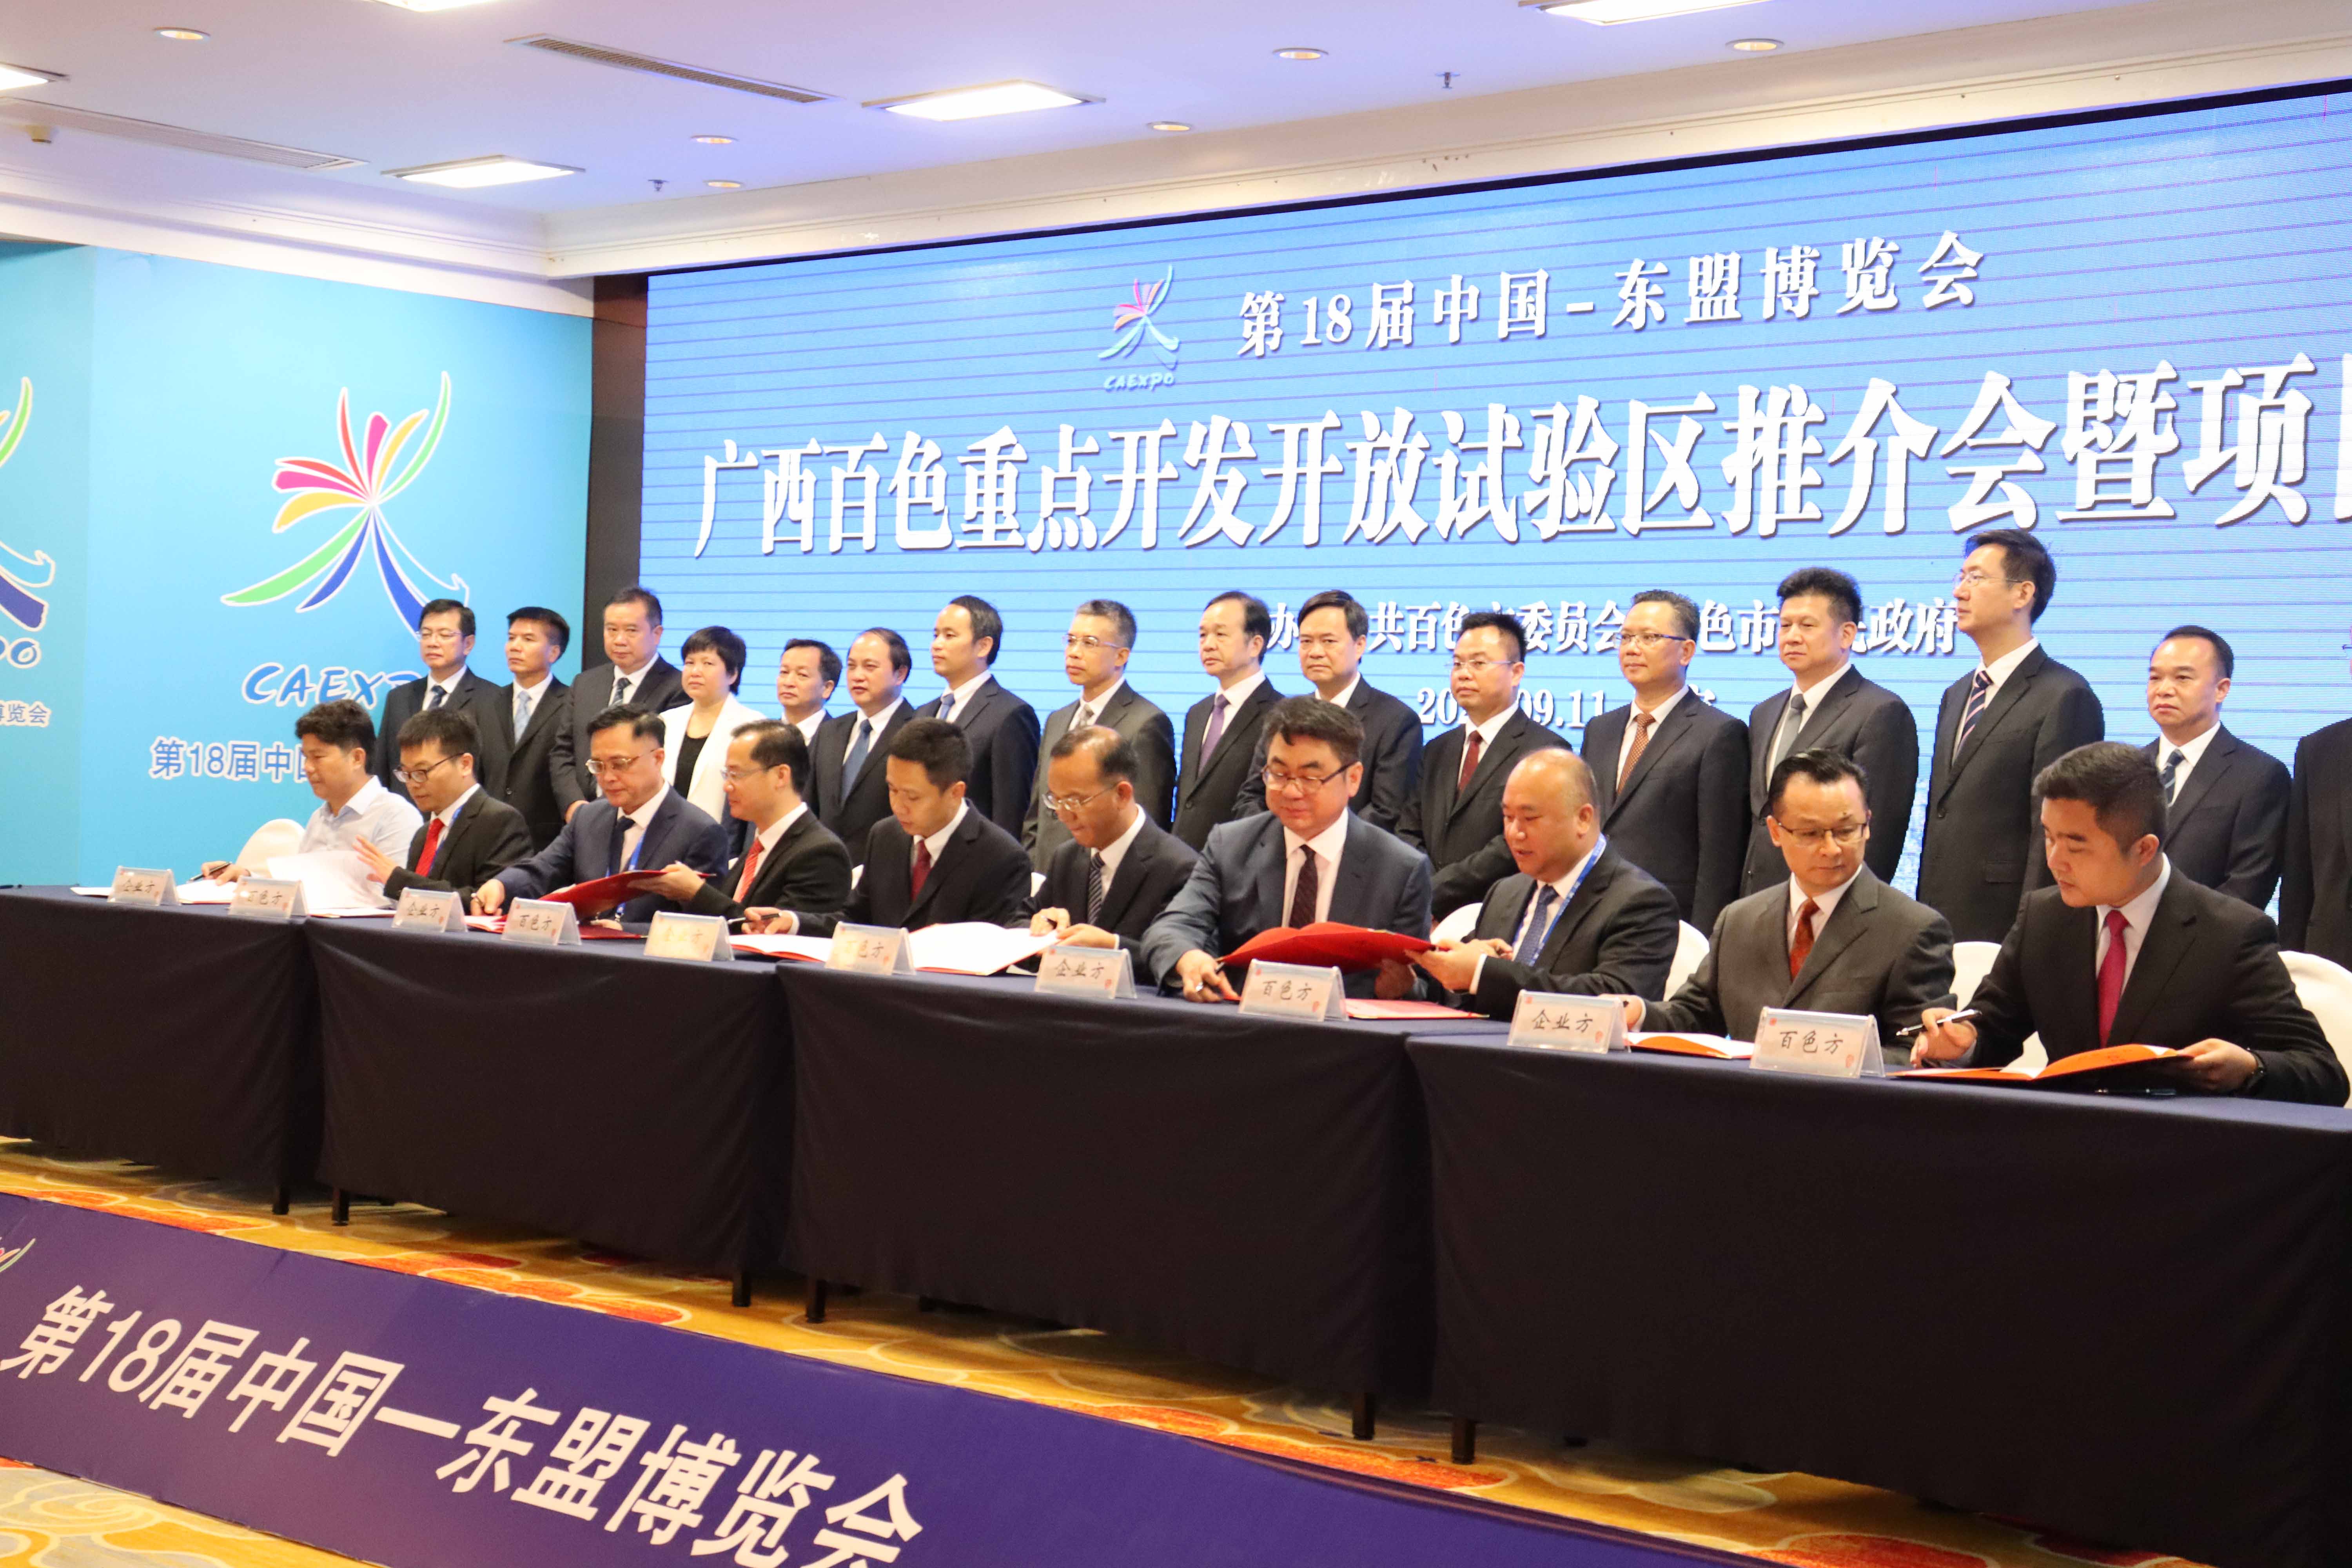 Promotion meeting and project signing ceremony of key development and opening up pilot zone in Baise, Guangxi